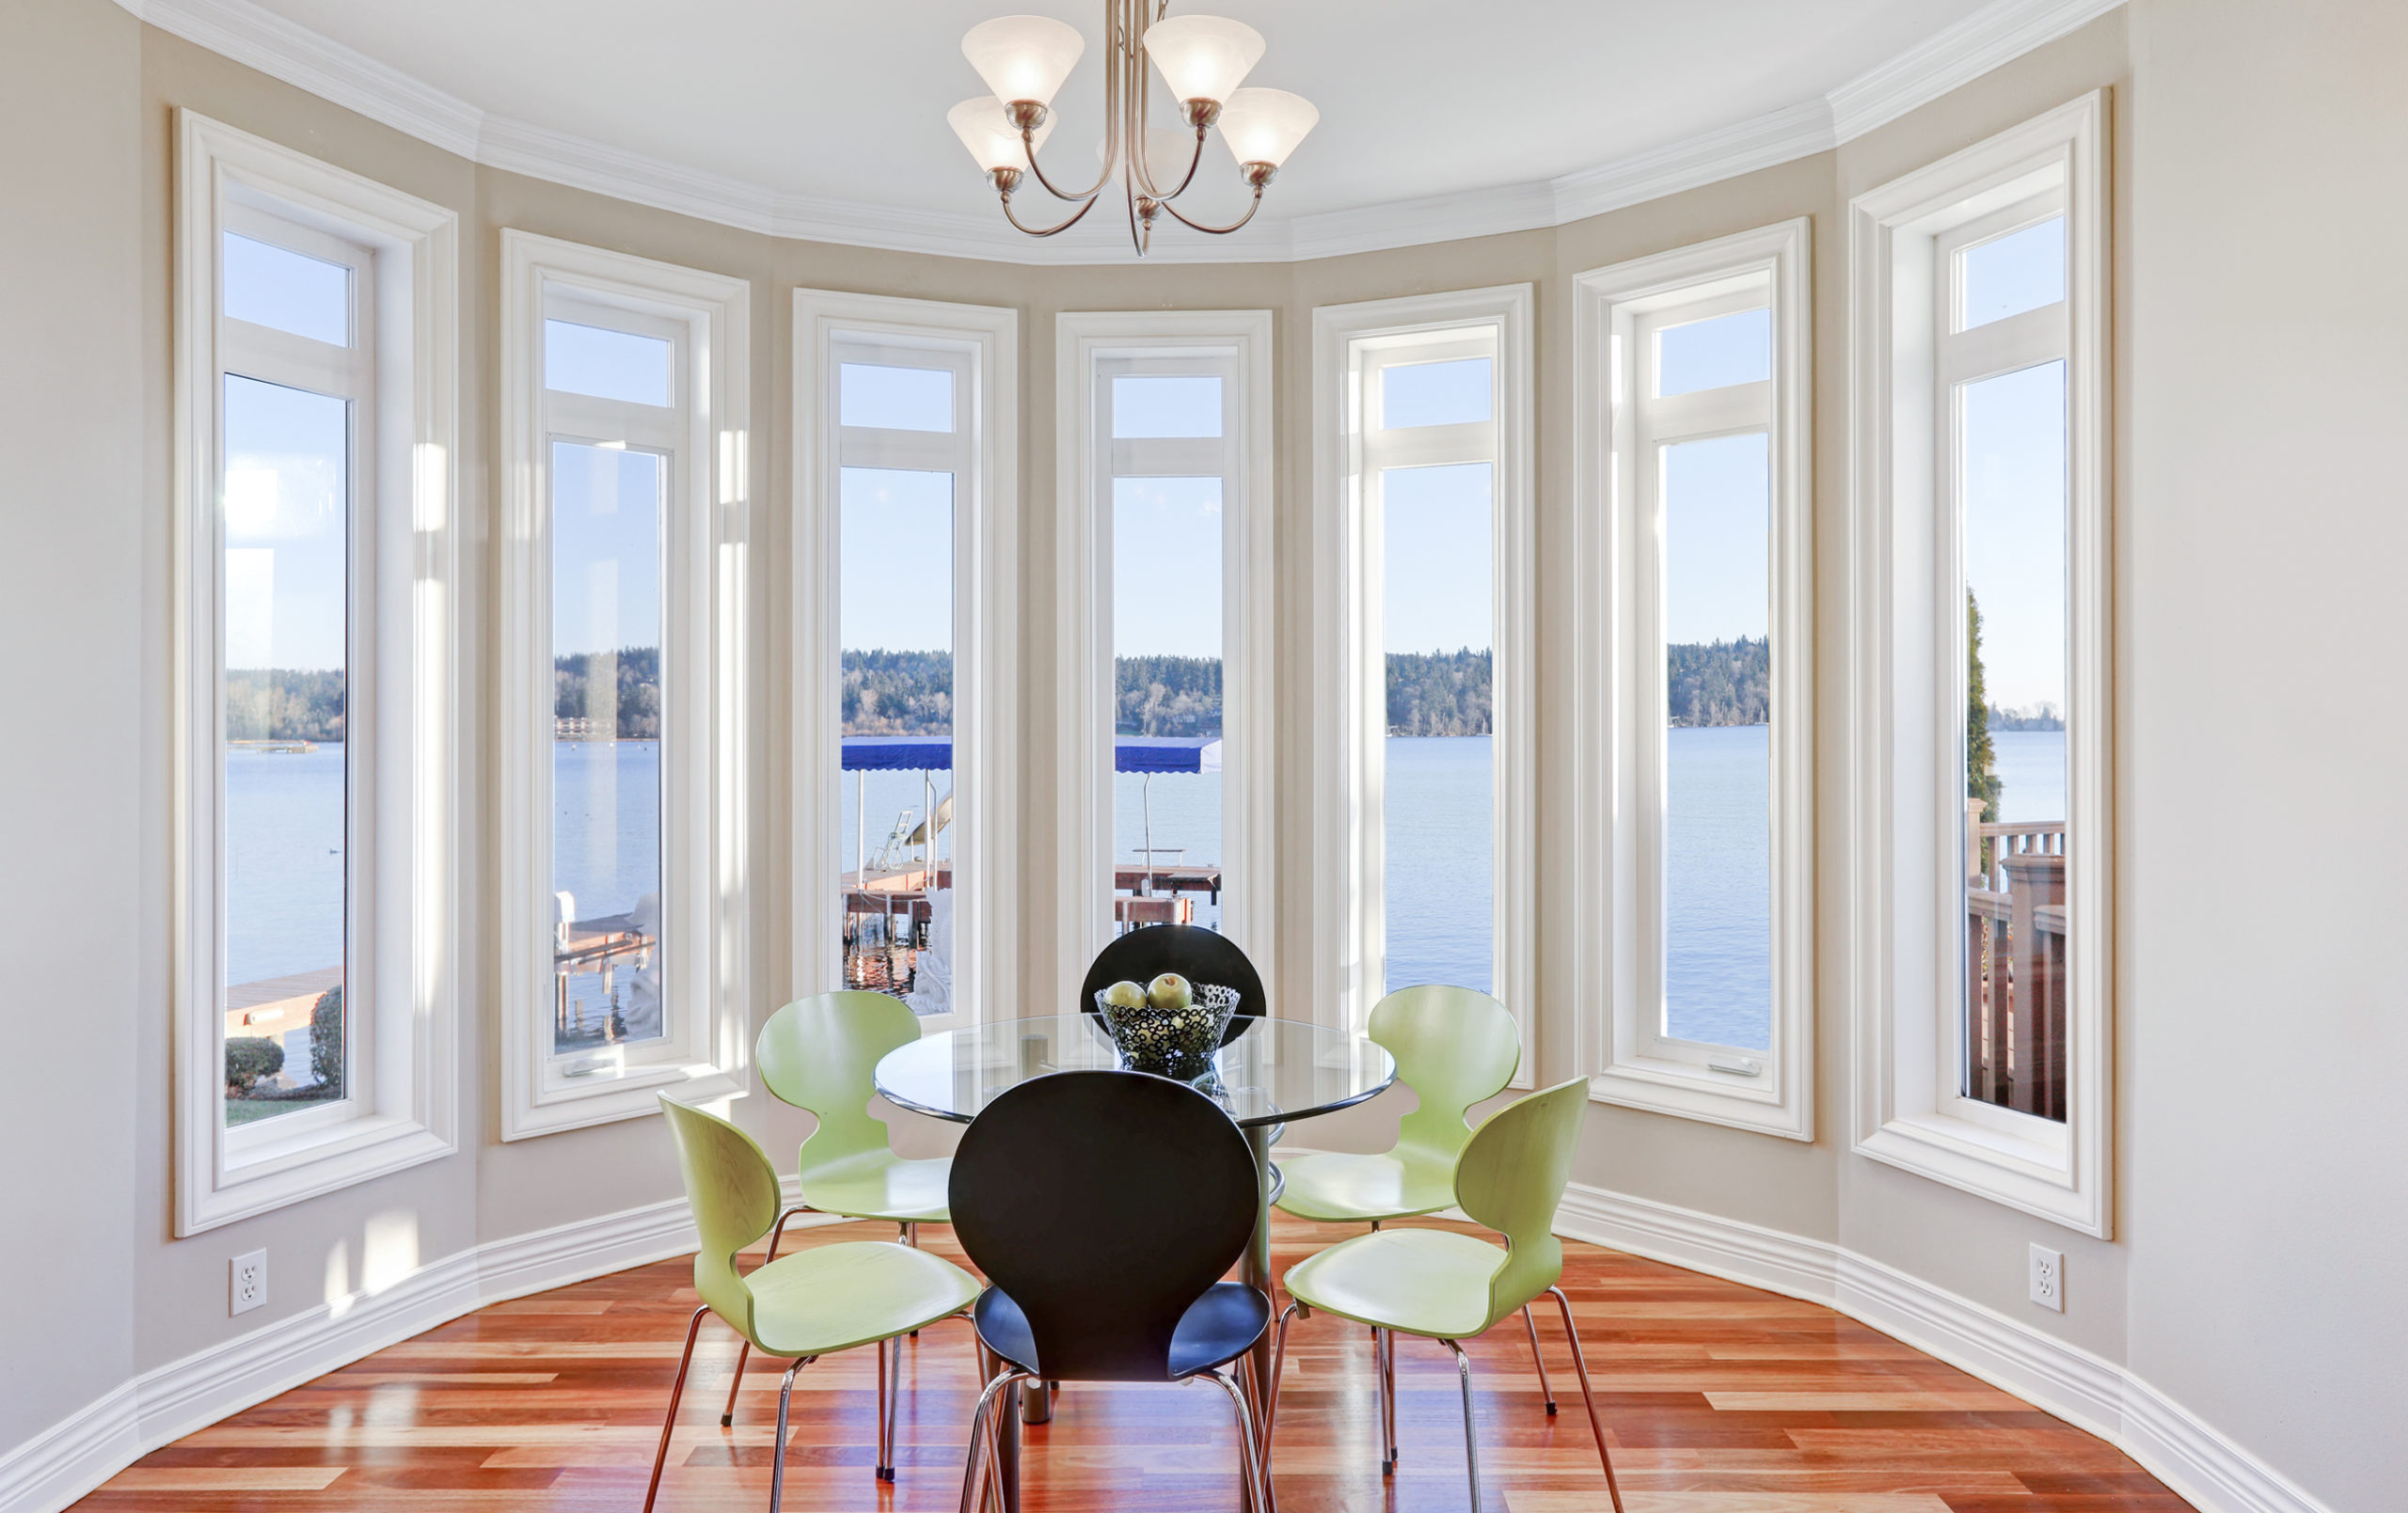 Interior look of a dining area displaying an example of Elegance Series windows